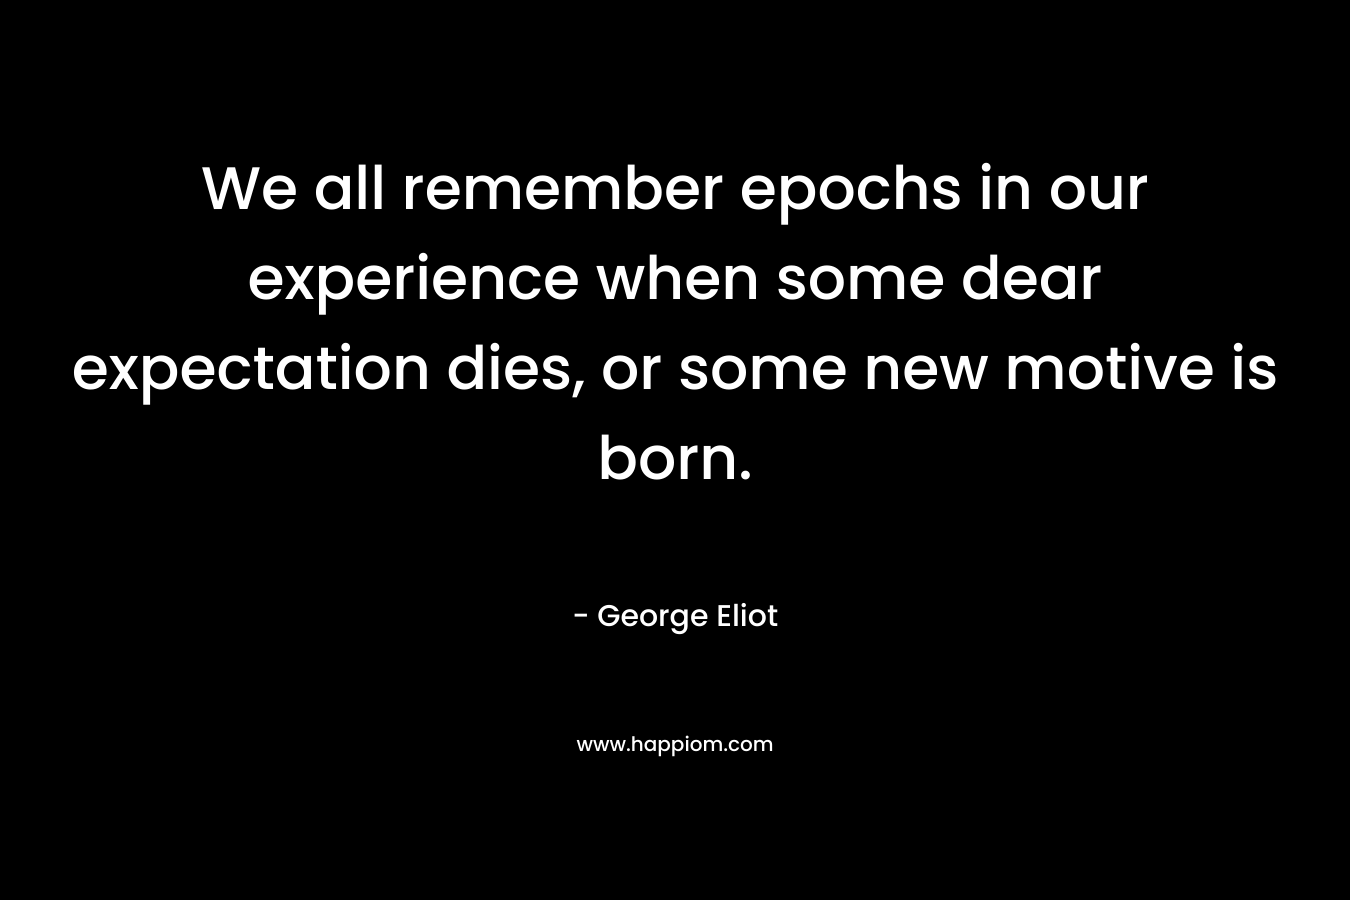 We all remember epochs in our experience when some dear expectation dies, or some new motive is born.